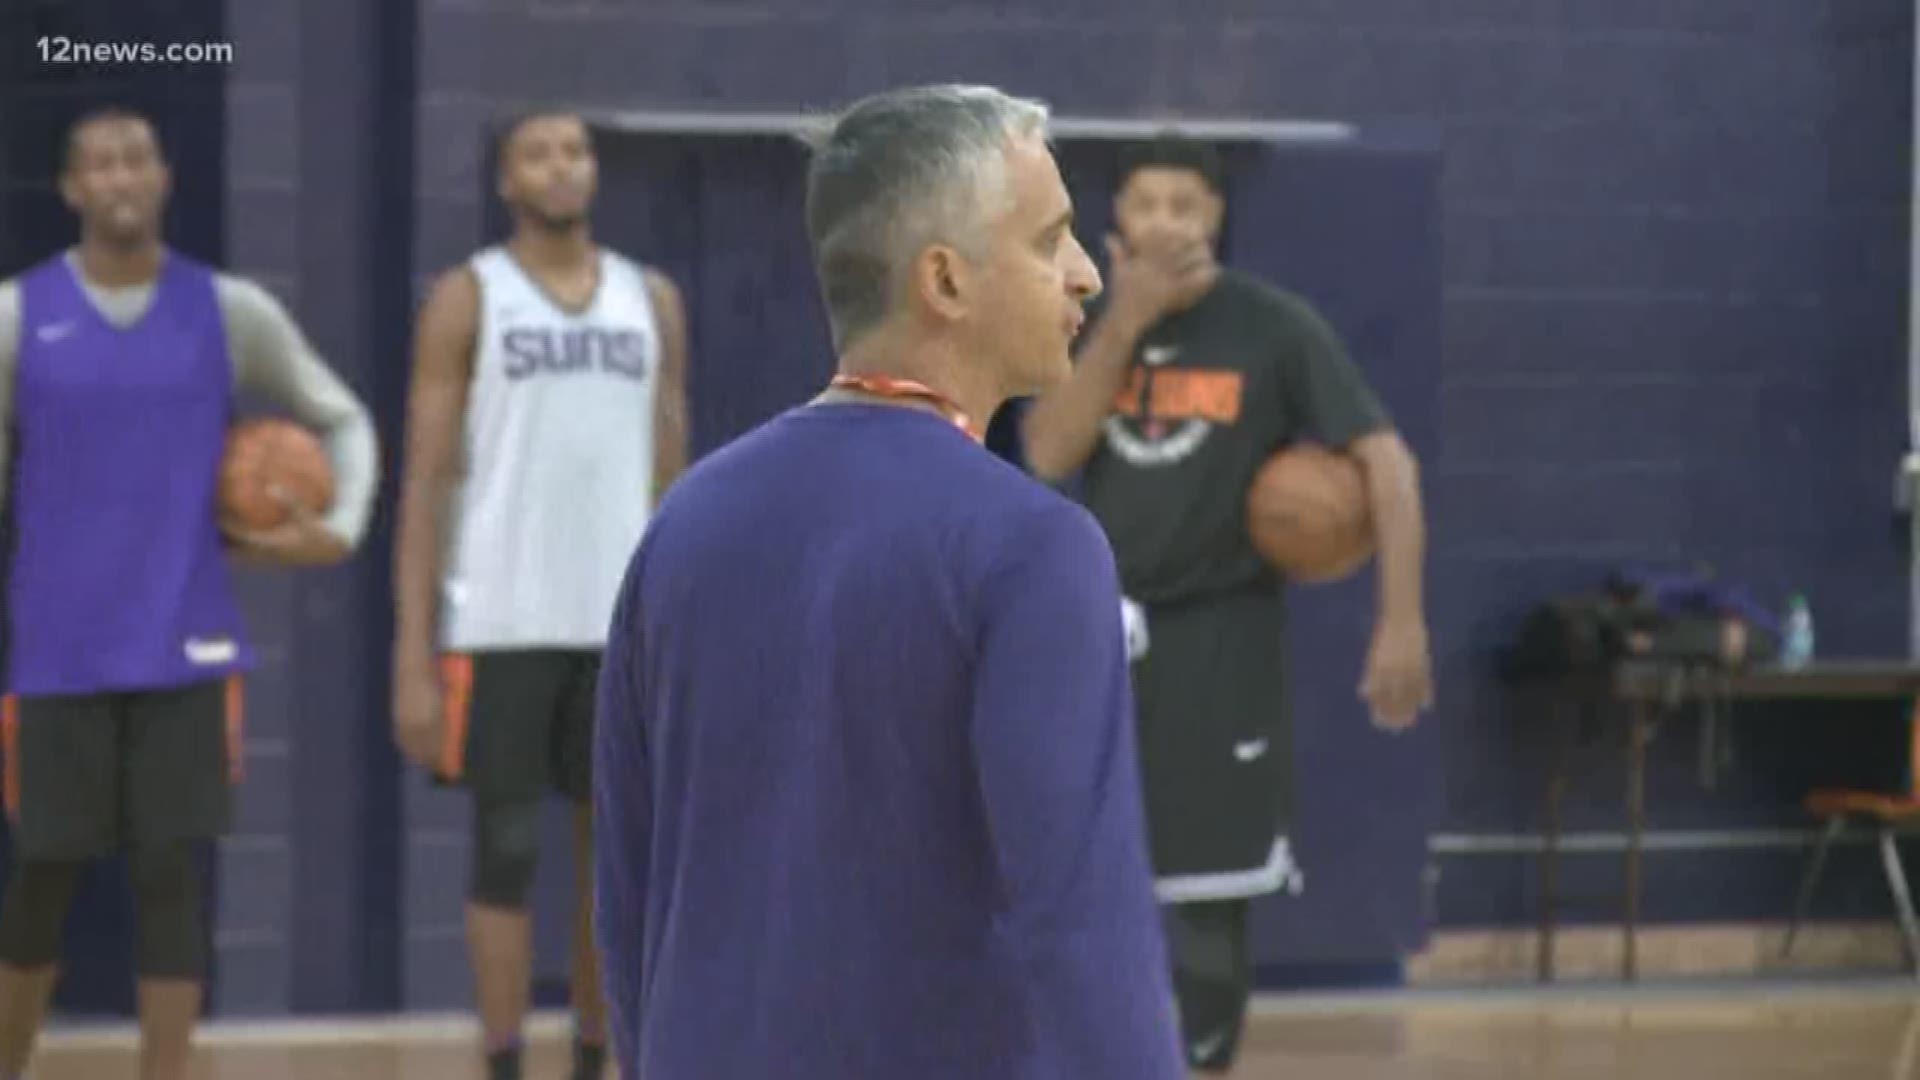 The Phoenix Suns have fired coach Igor Kokoskov after one season, according to a report from ESPN.